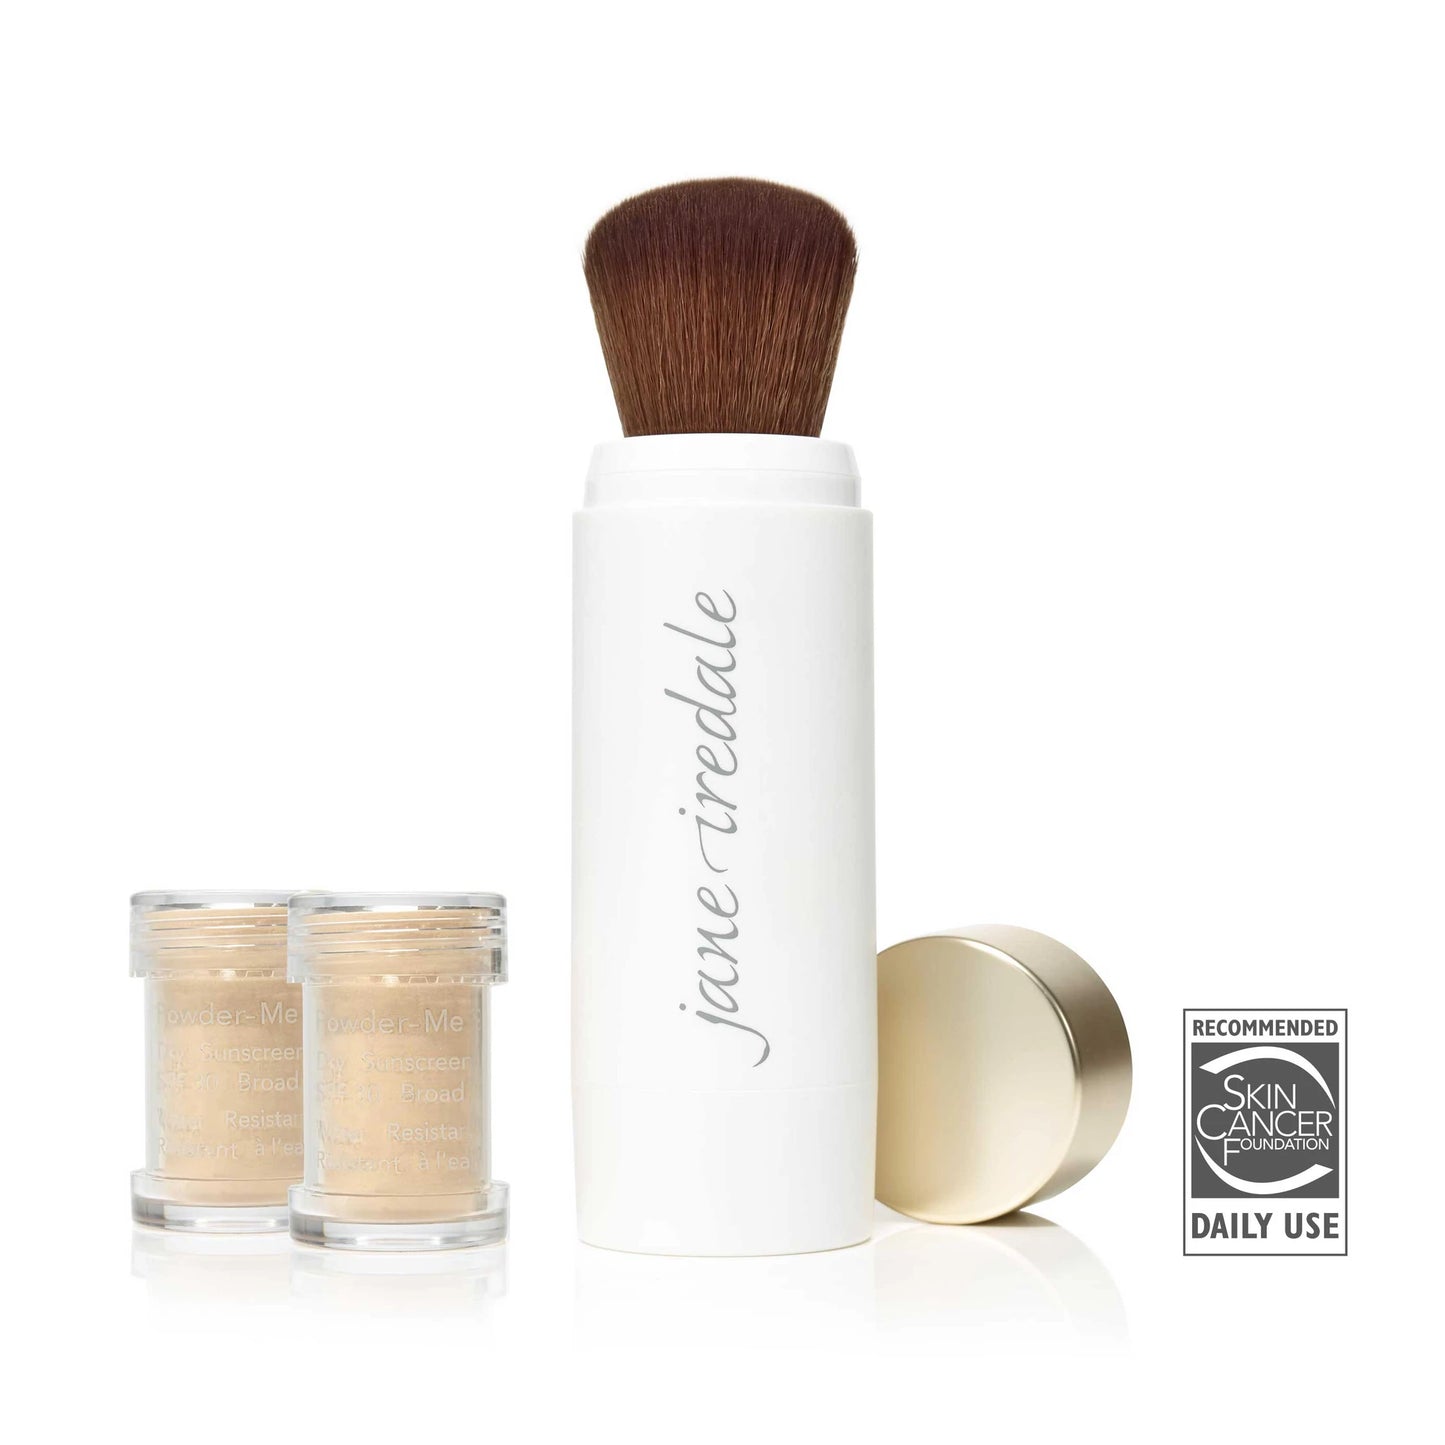 Load image into Gallery viewer, Jane Iredale Powder Me SPF 30 | Dry powder broad spectrum SPF 30 sunscreen for body, face and scalp | Vegan, Cruelty Fre, Reef Safe, Natural
